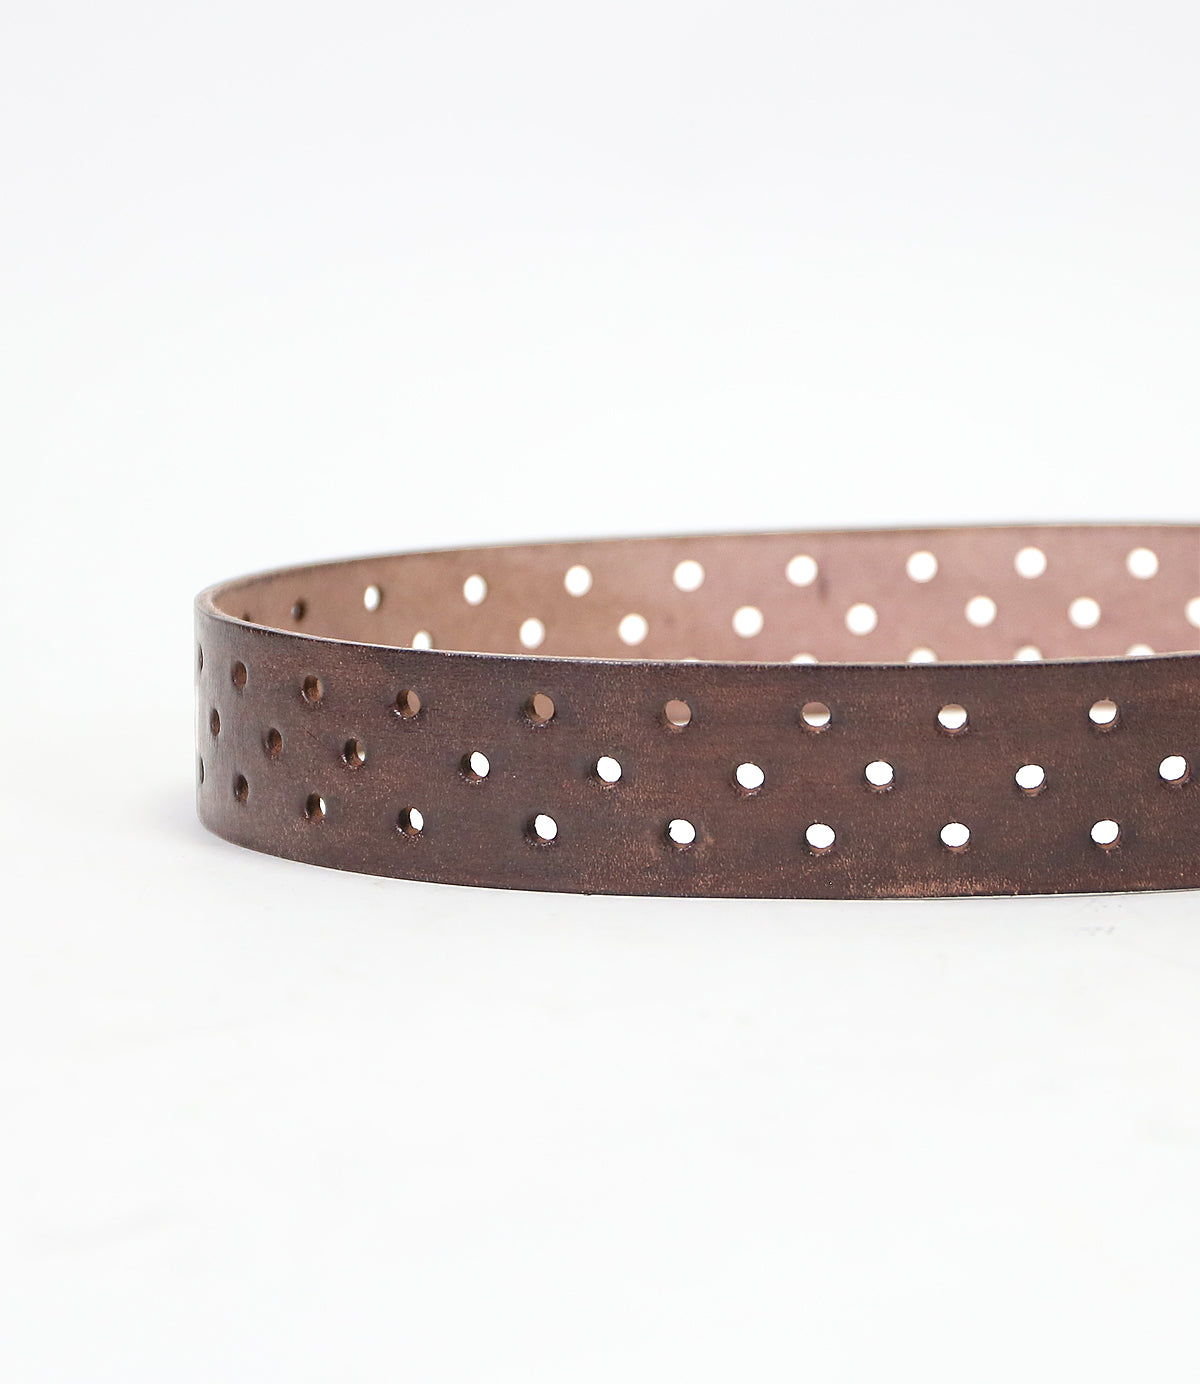 Brown McCoy vegetable-tanned leather belt with multiple perforations displayed on a white background by Bed Stu.